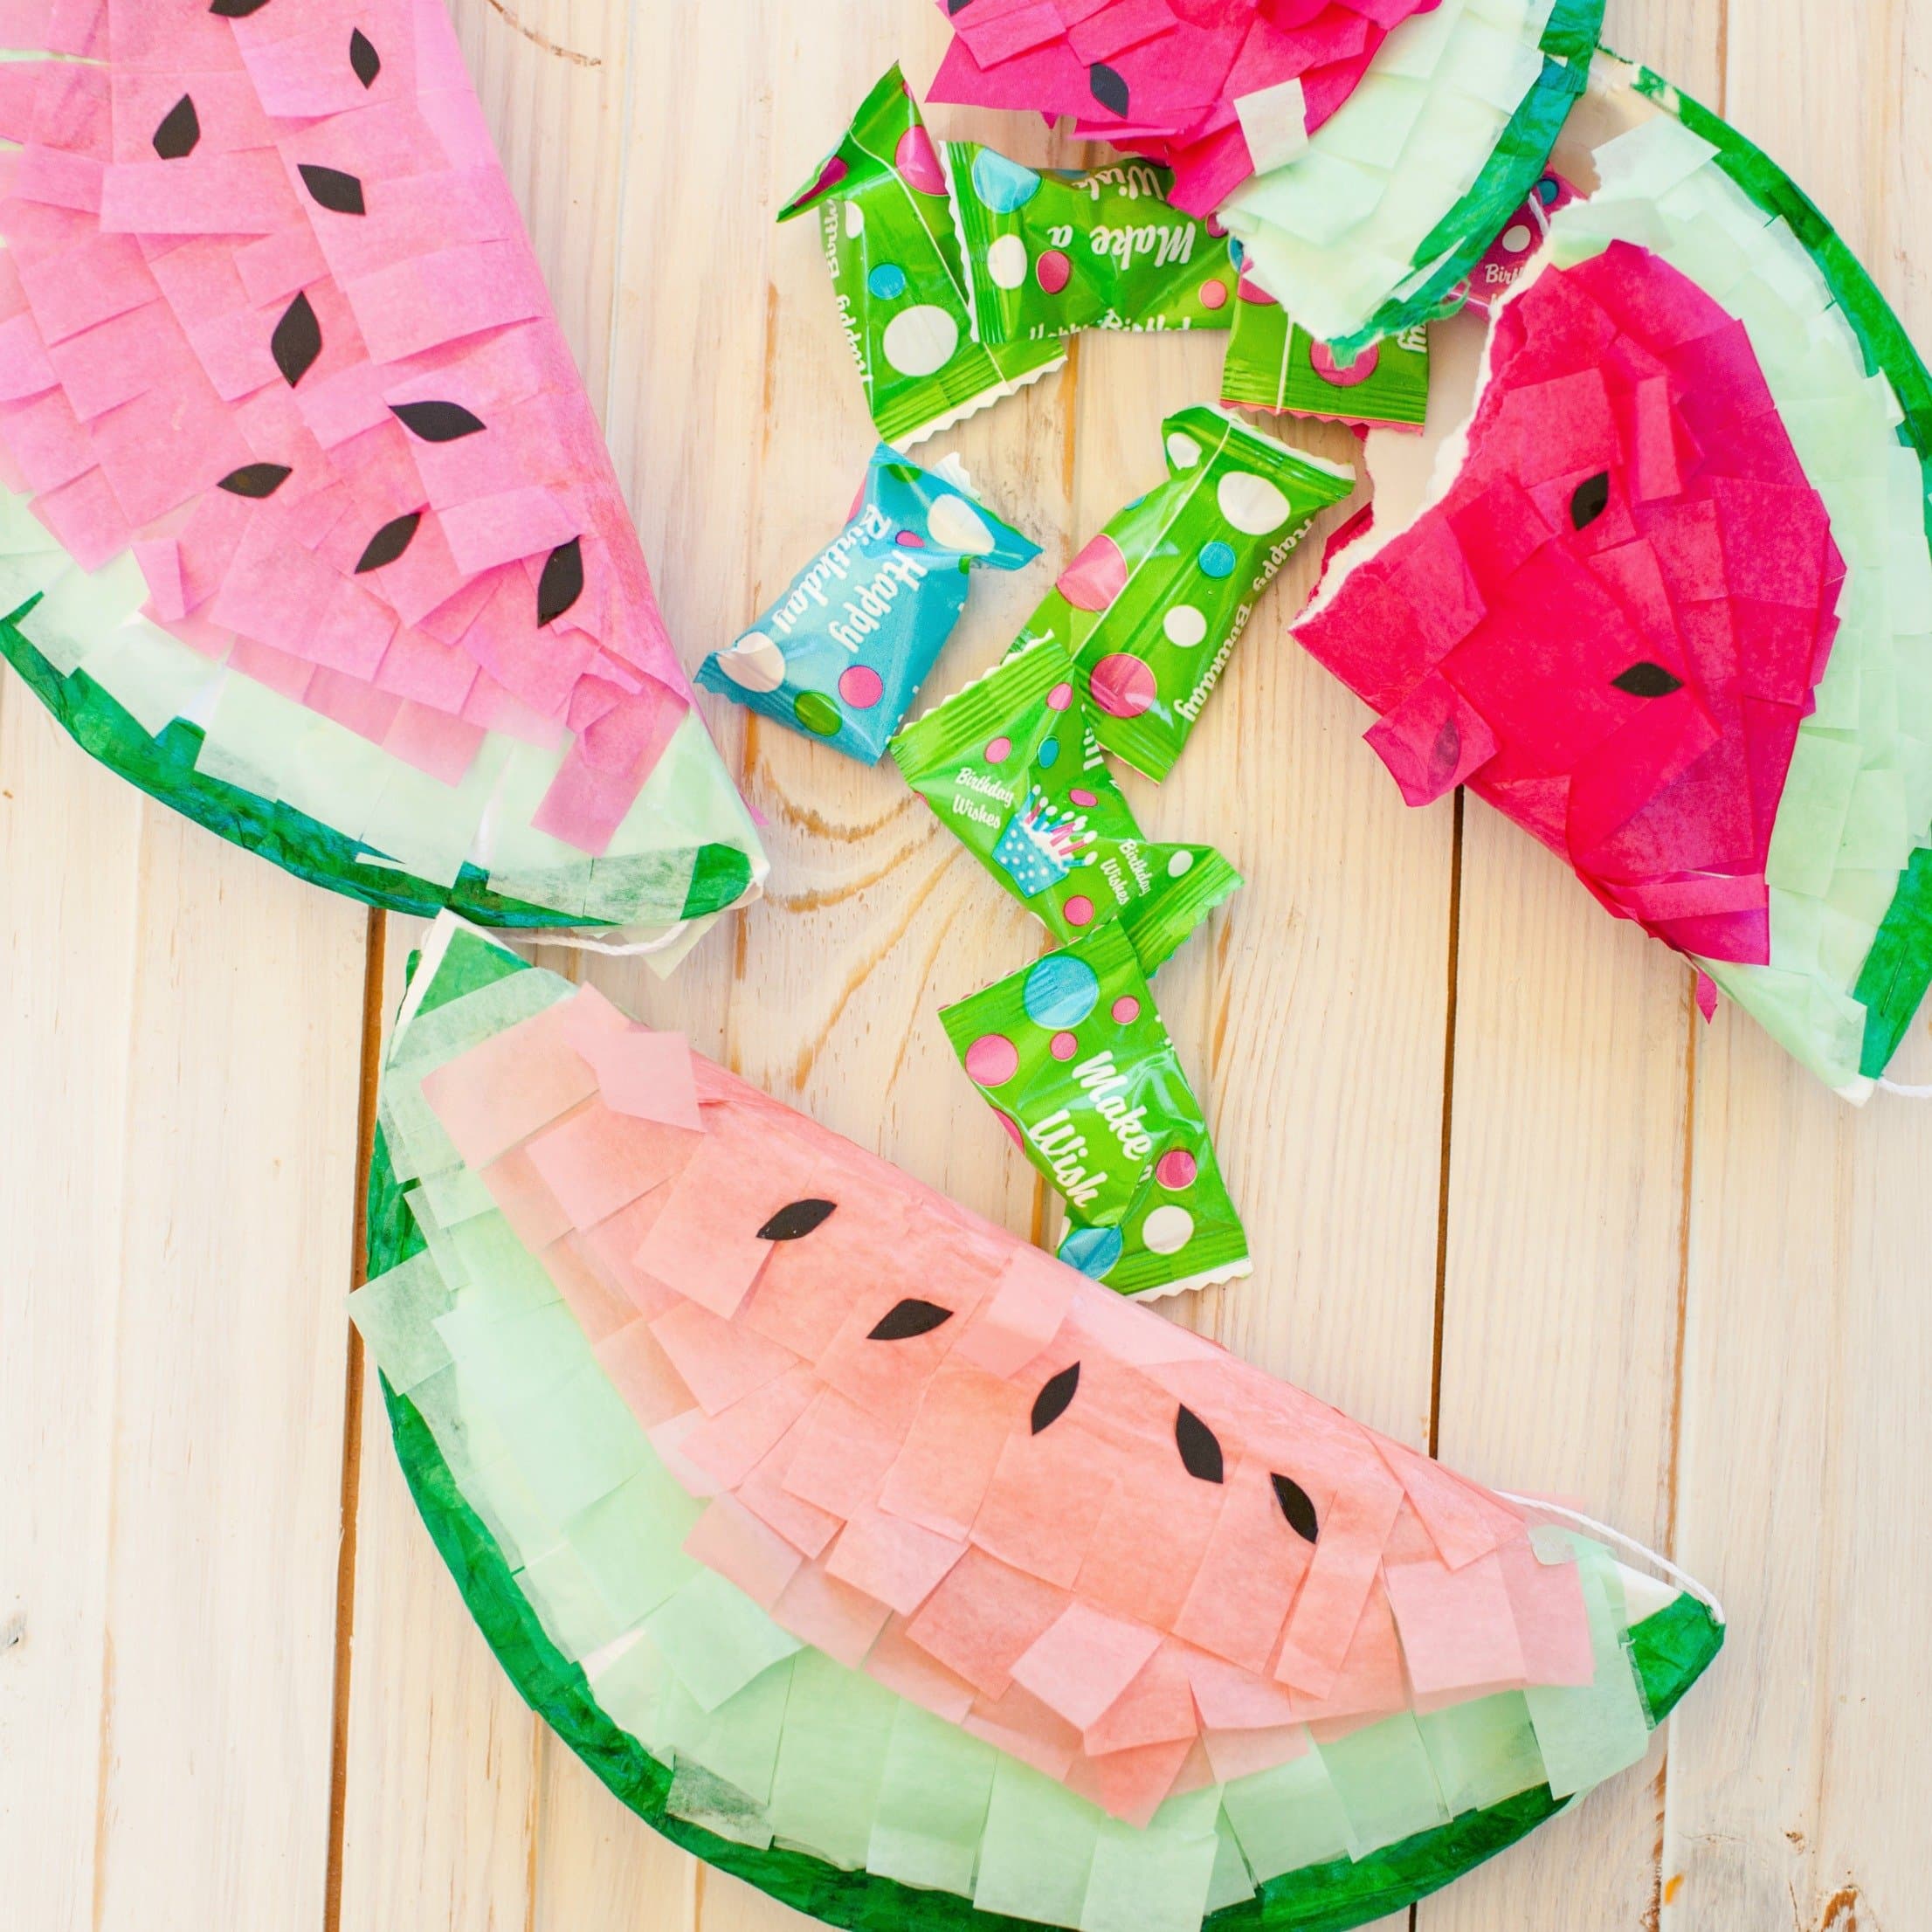 20 Sweet and Summery Watermelon Crafts & DIY Projects for kids of all ages! You're going to love making these creative projects with preschoolers, toddlers and teens! Ideas include everything from magnets, pillows, pinatas, painted bowls, planters, easy paper plate crafts and more!